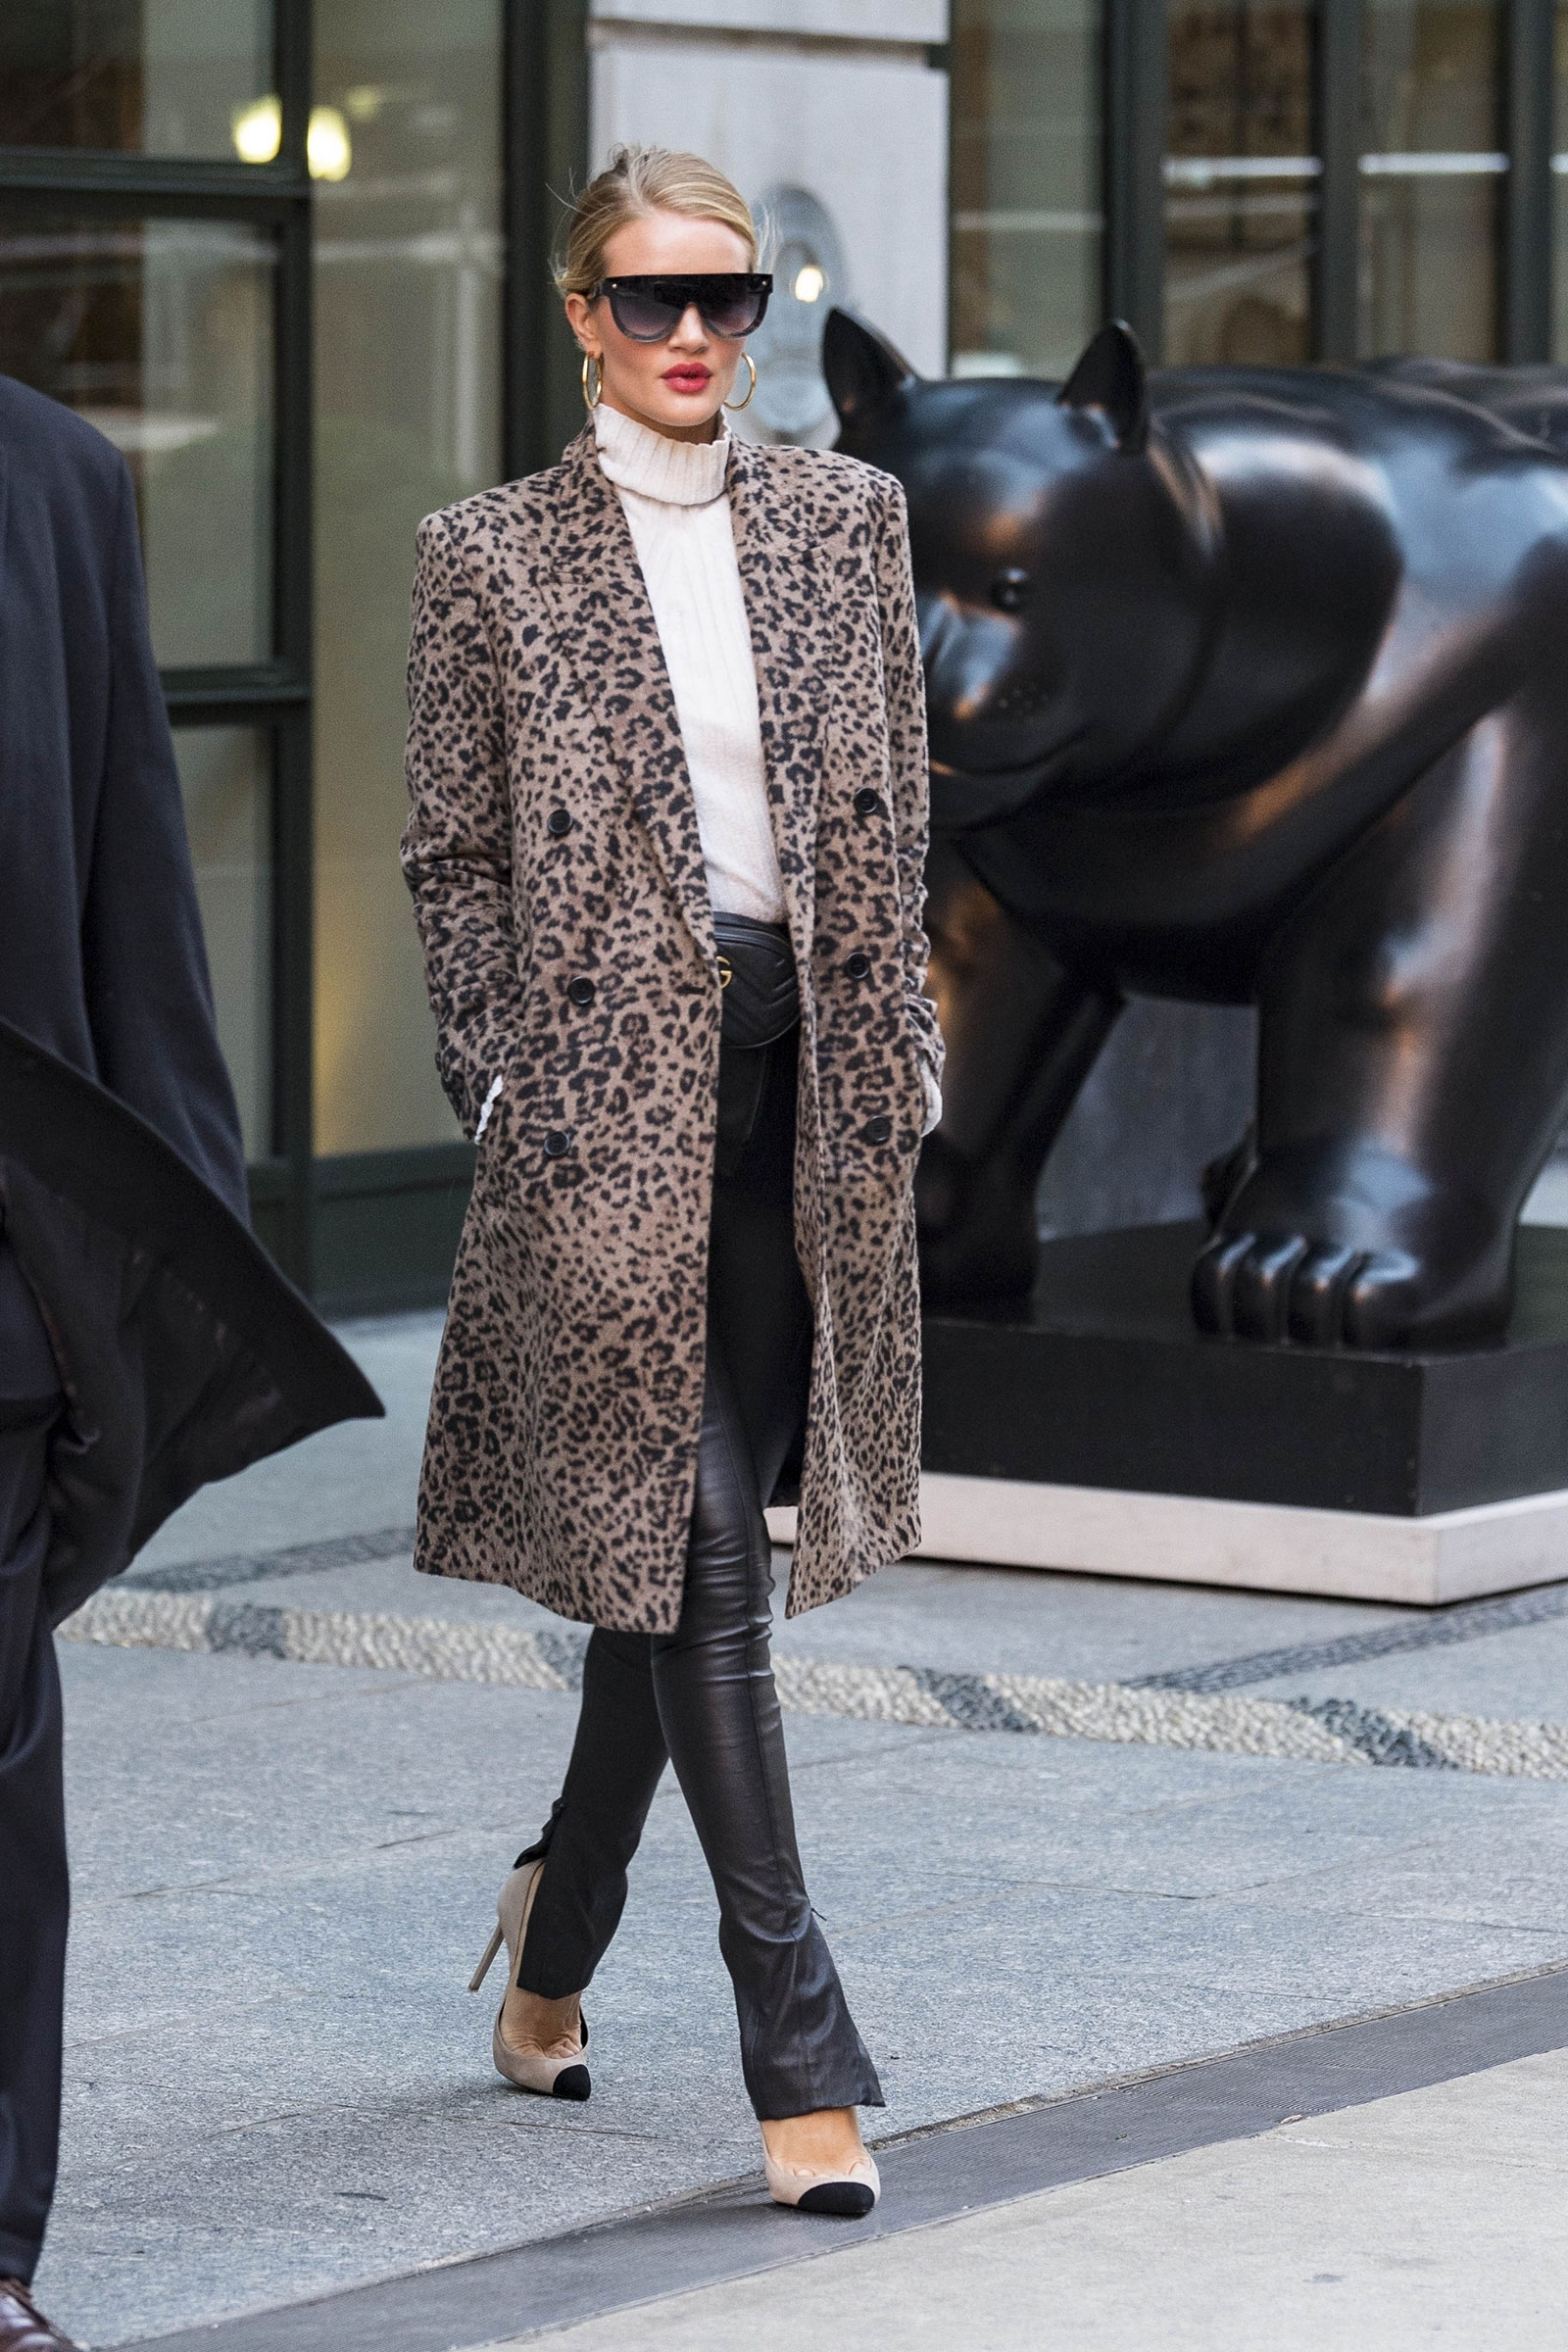 Rosie Huntington-Whiteley wears a leopard coat with leather pants and cap-toe pumps